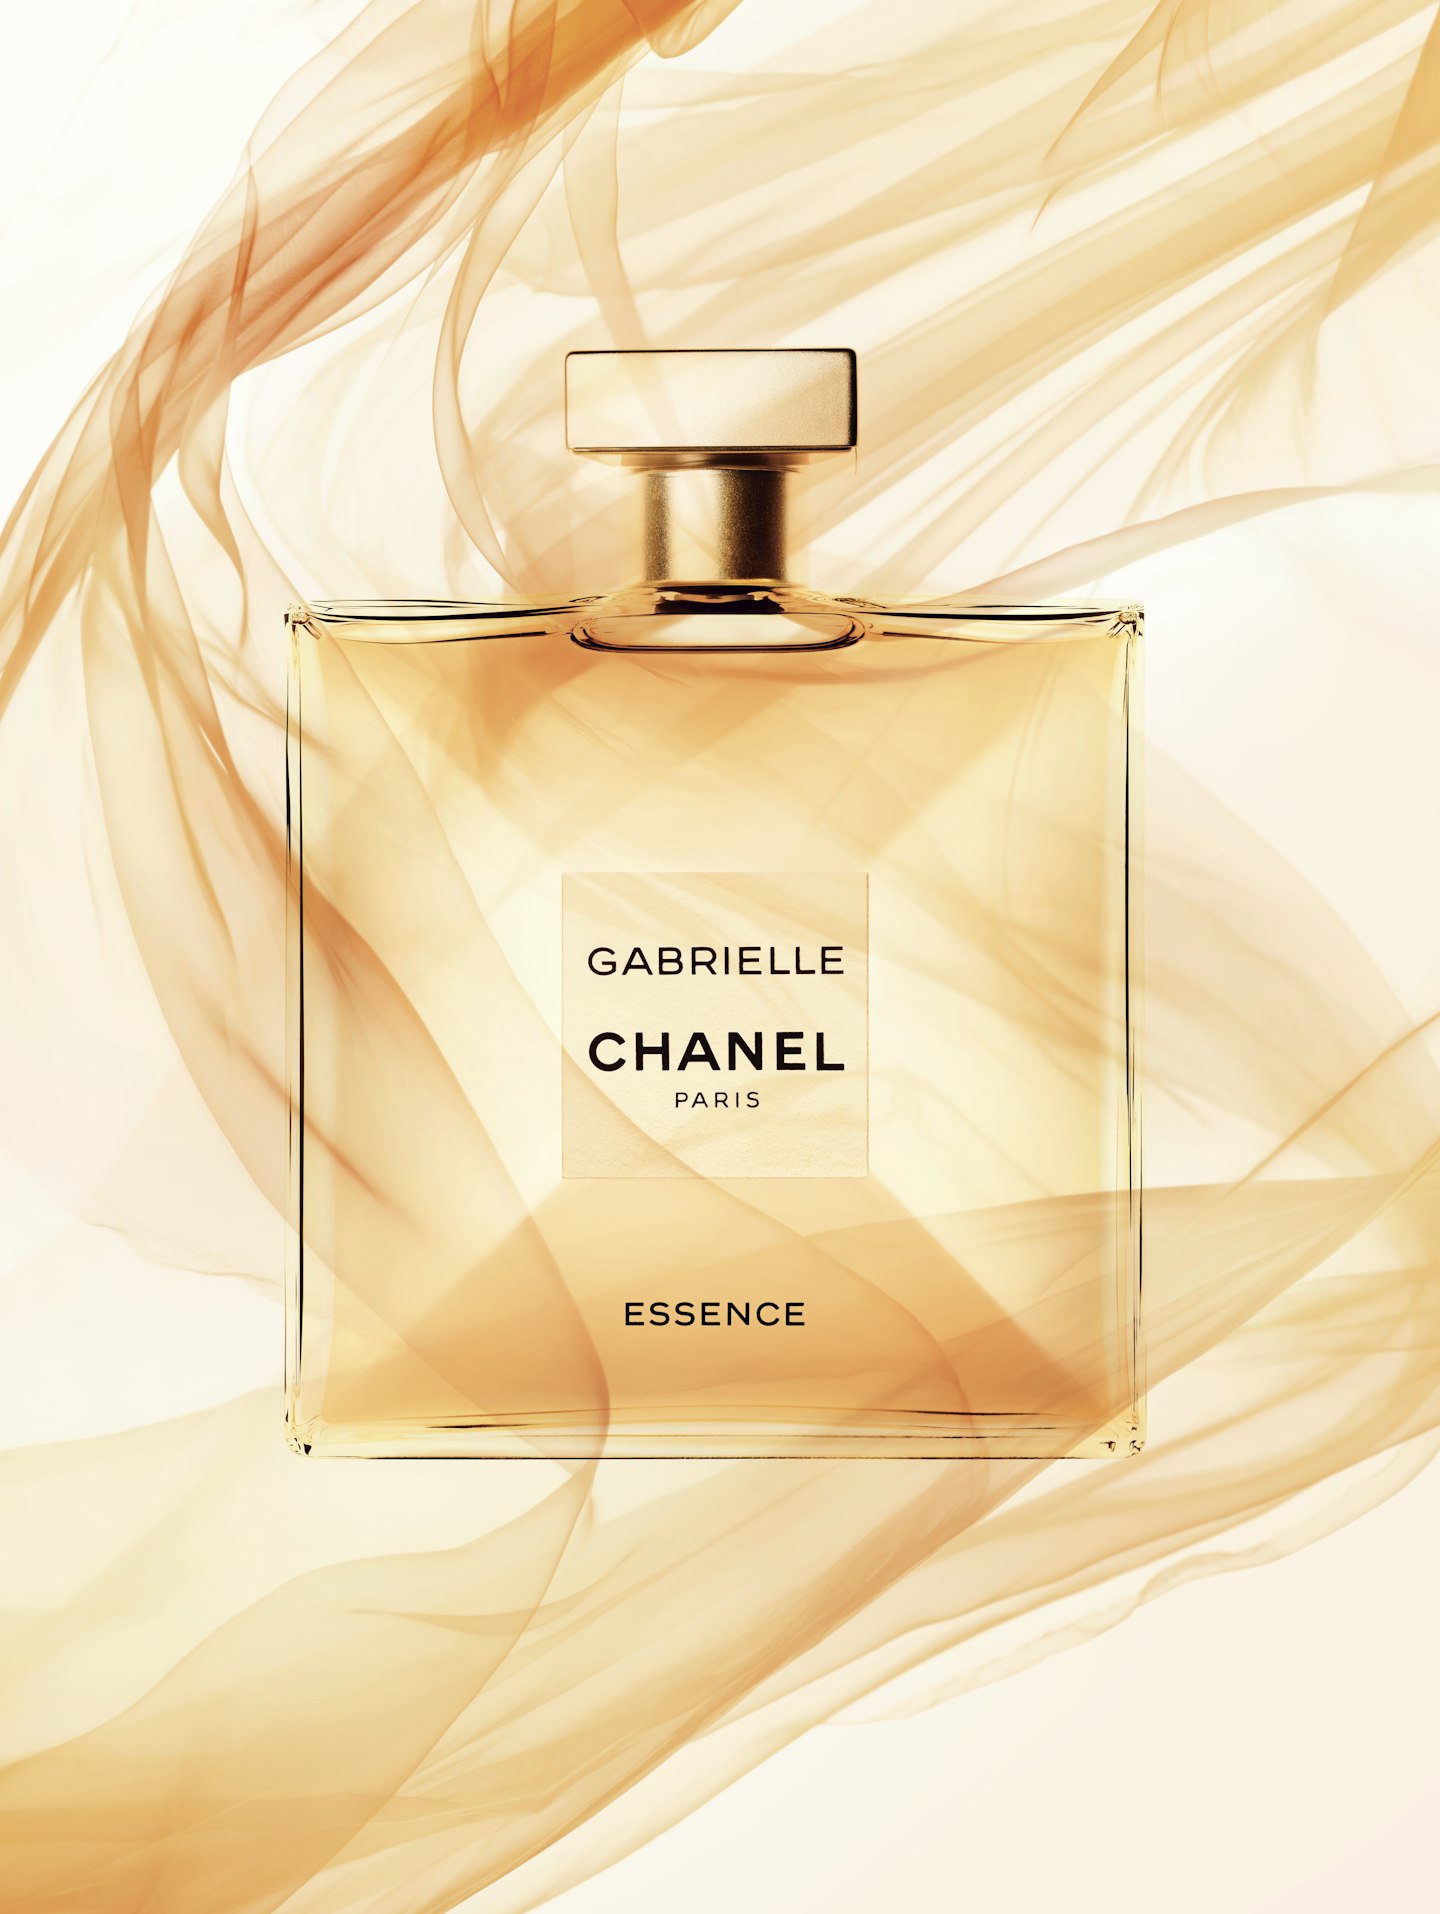 REAL OR FAKE - Chanel Gabrielle Essence